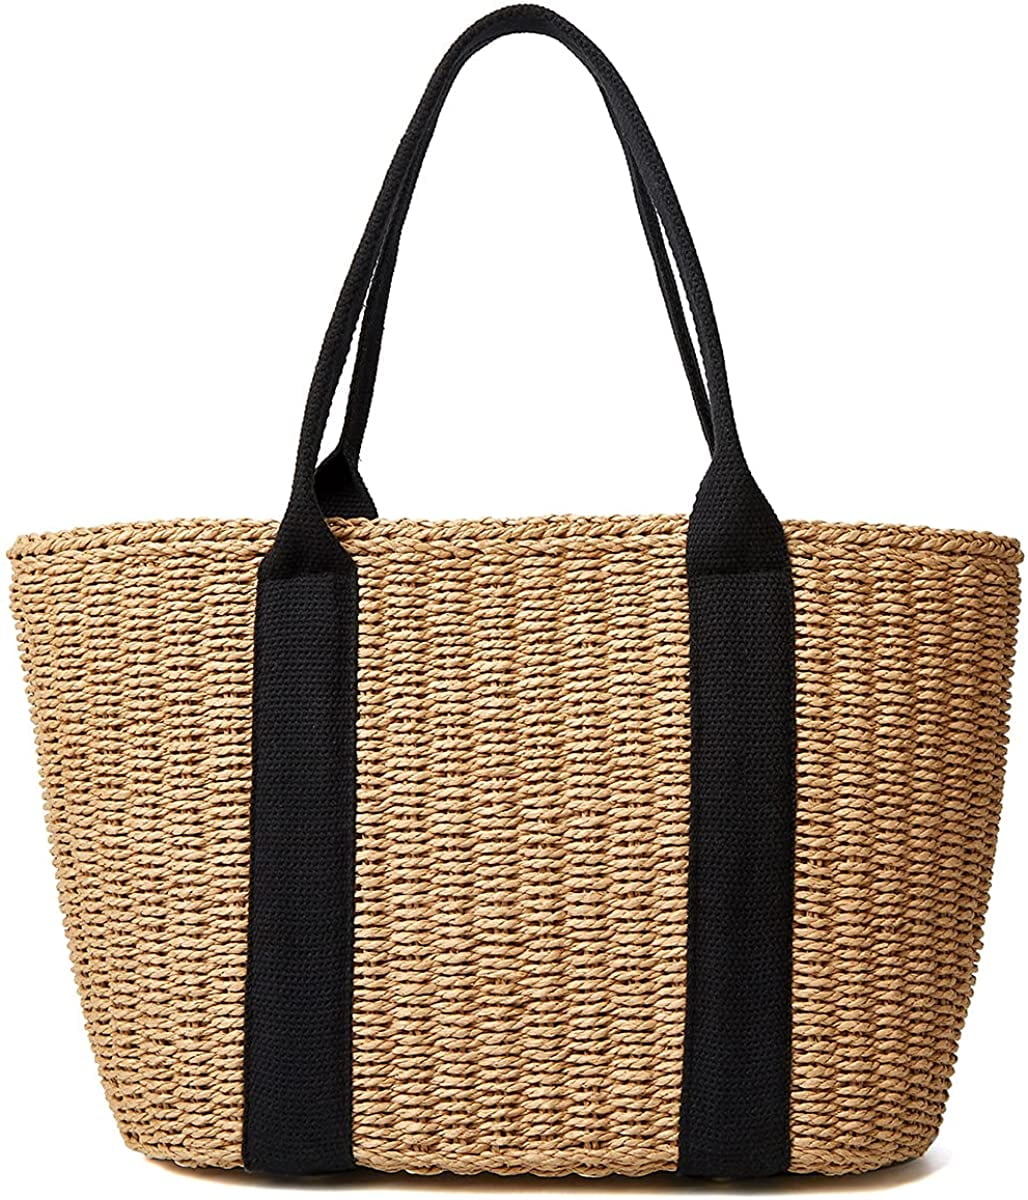 Fashion Woven Summer Straw Tote Bag for Ladies 